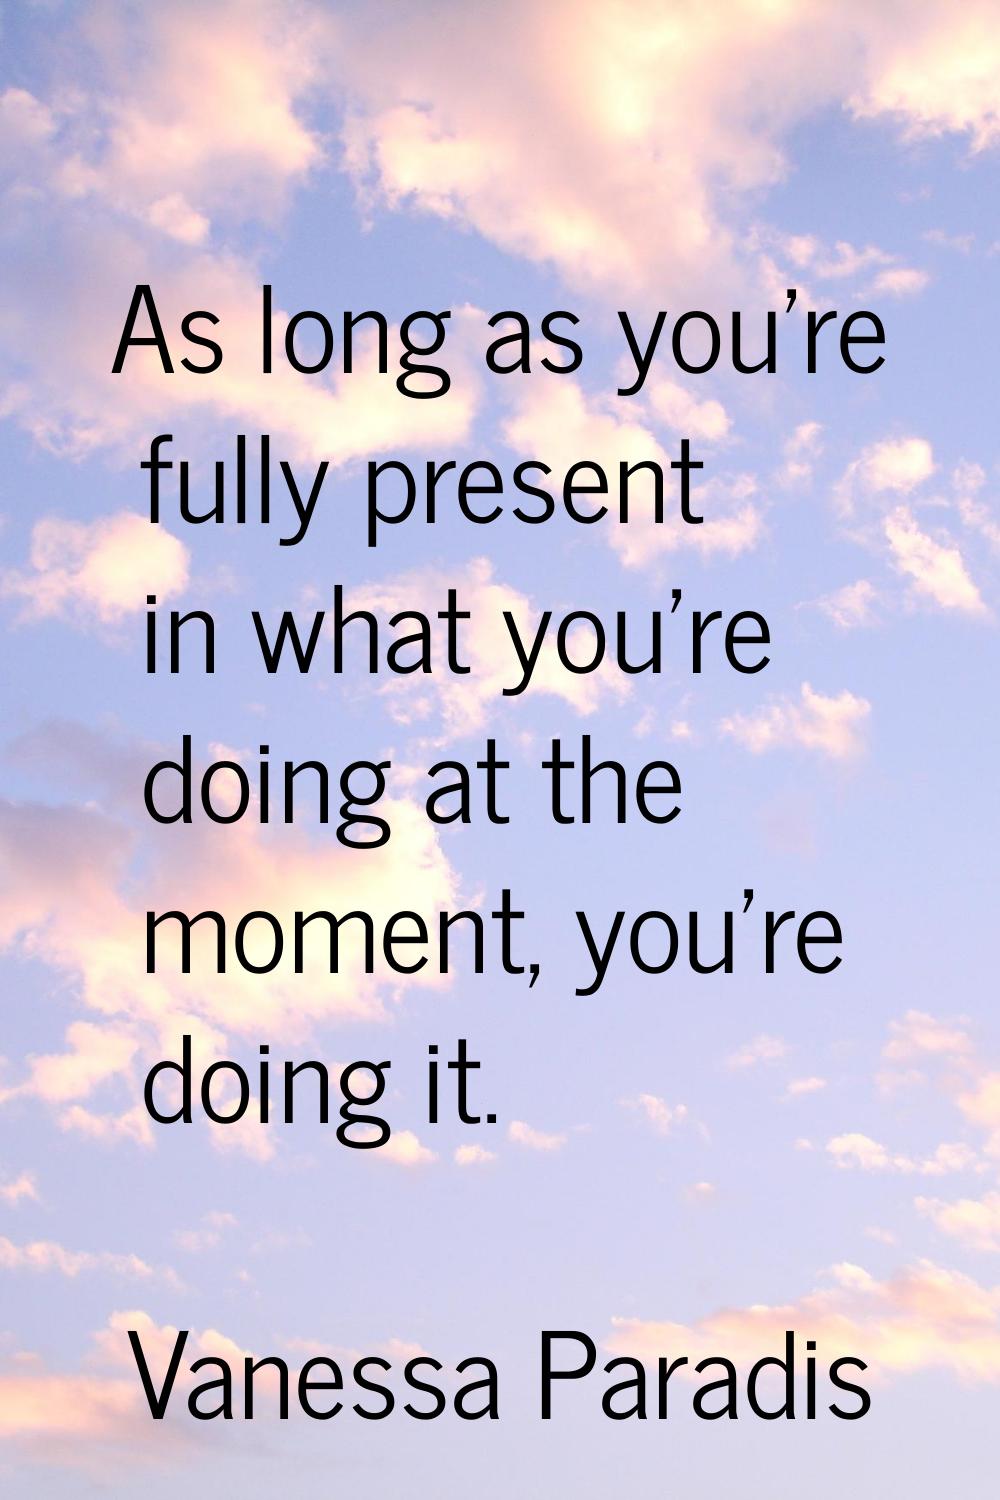 As long as you're fully present in what you're doing at the moment, you're doing it.